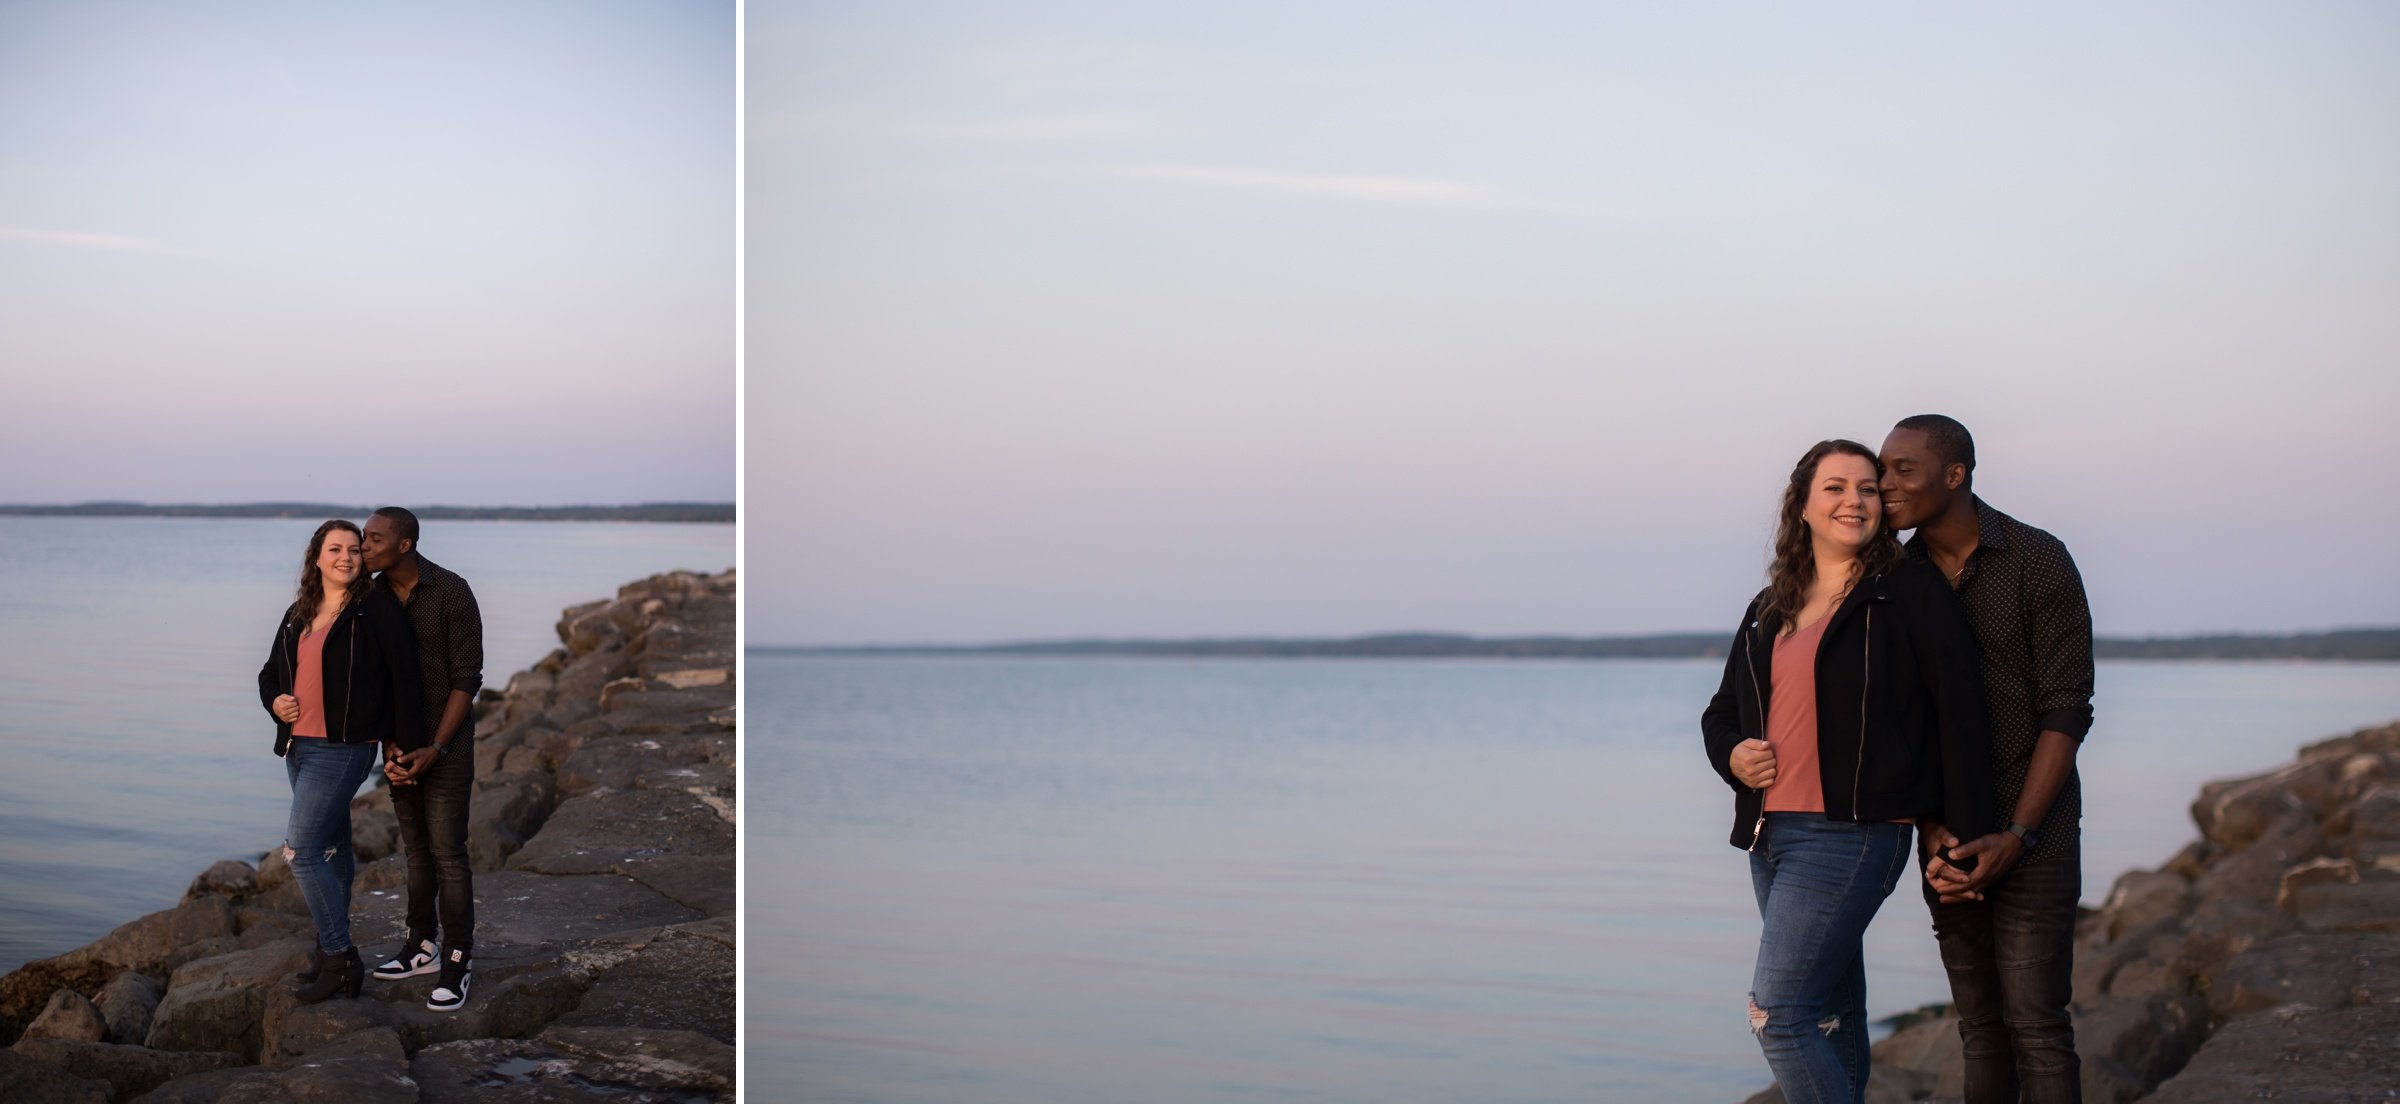 Jessica and Paul - A Sunset Bay Shore Park Engagement Session51.jpg